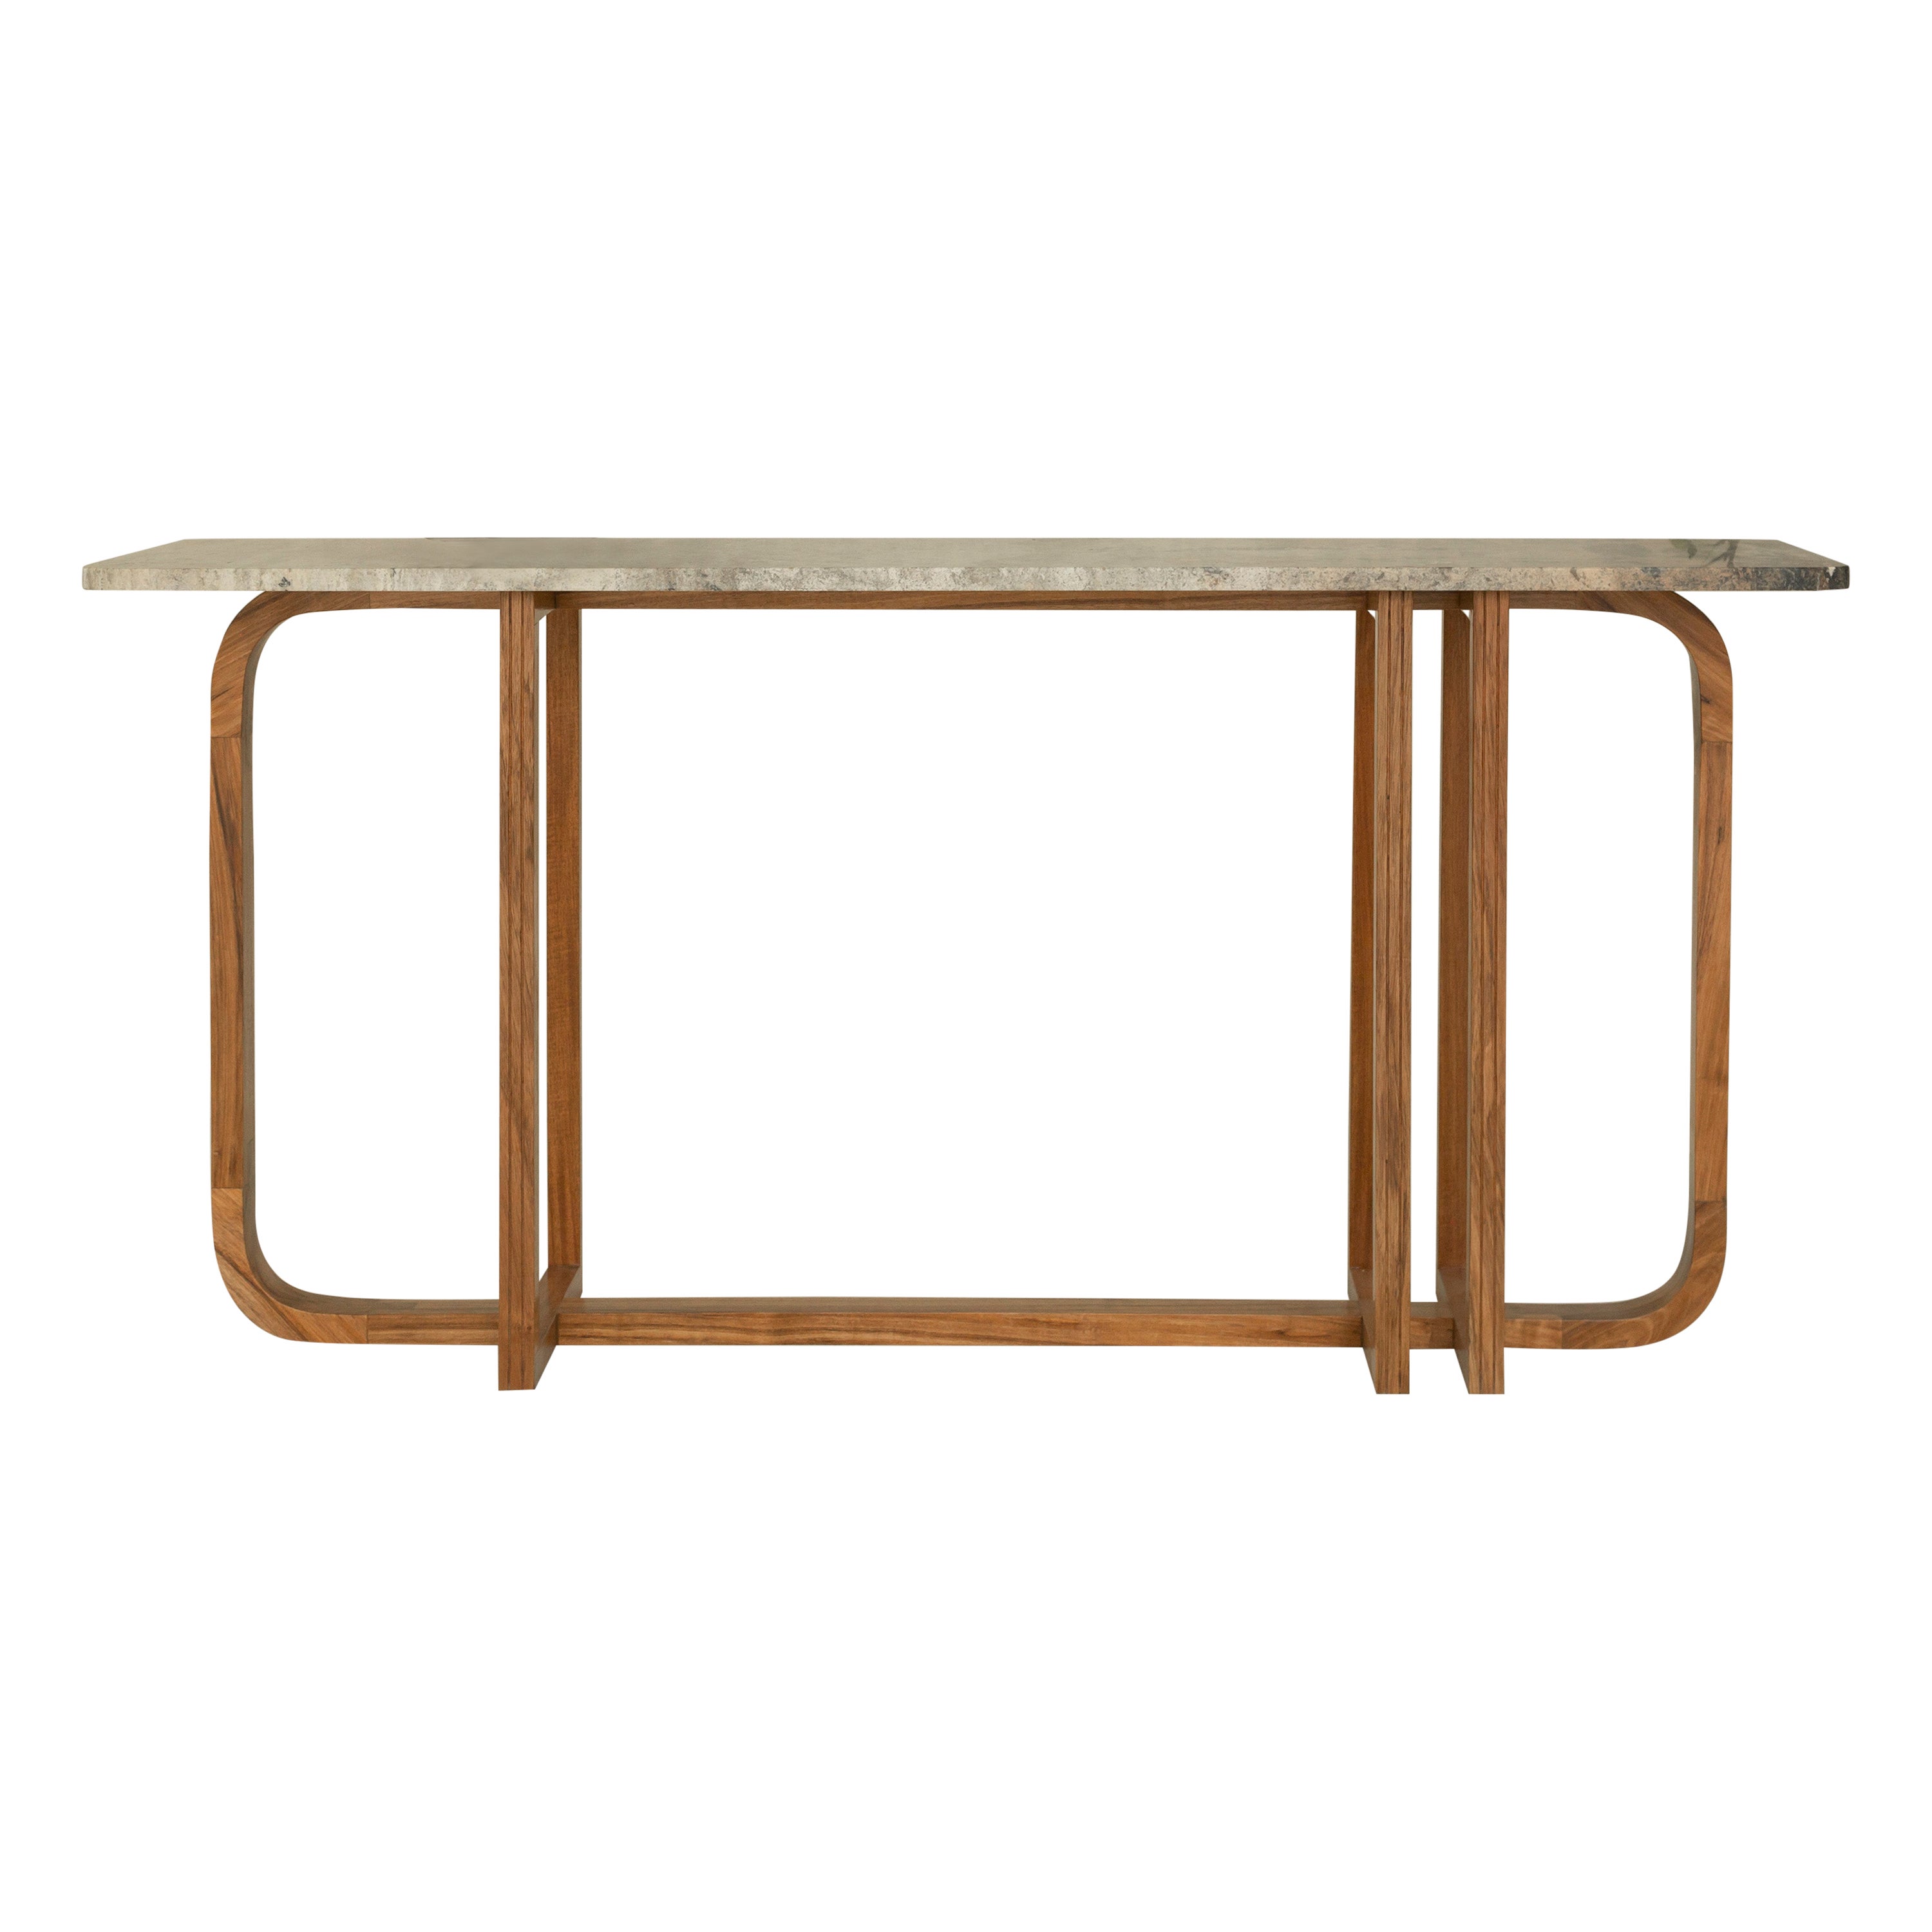 Samara Console Table in Tzalam Wood and Travertine Marble by Tana Karei For Sale